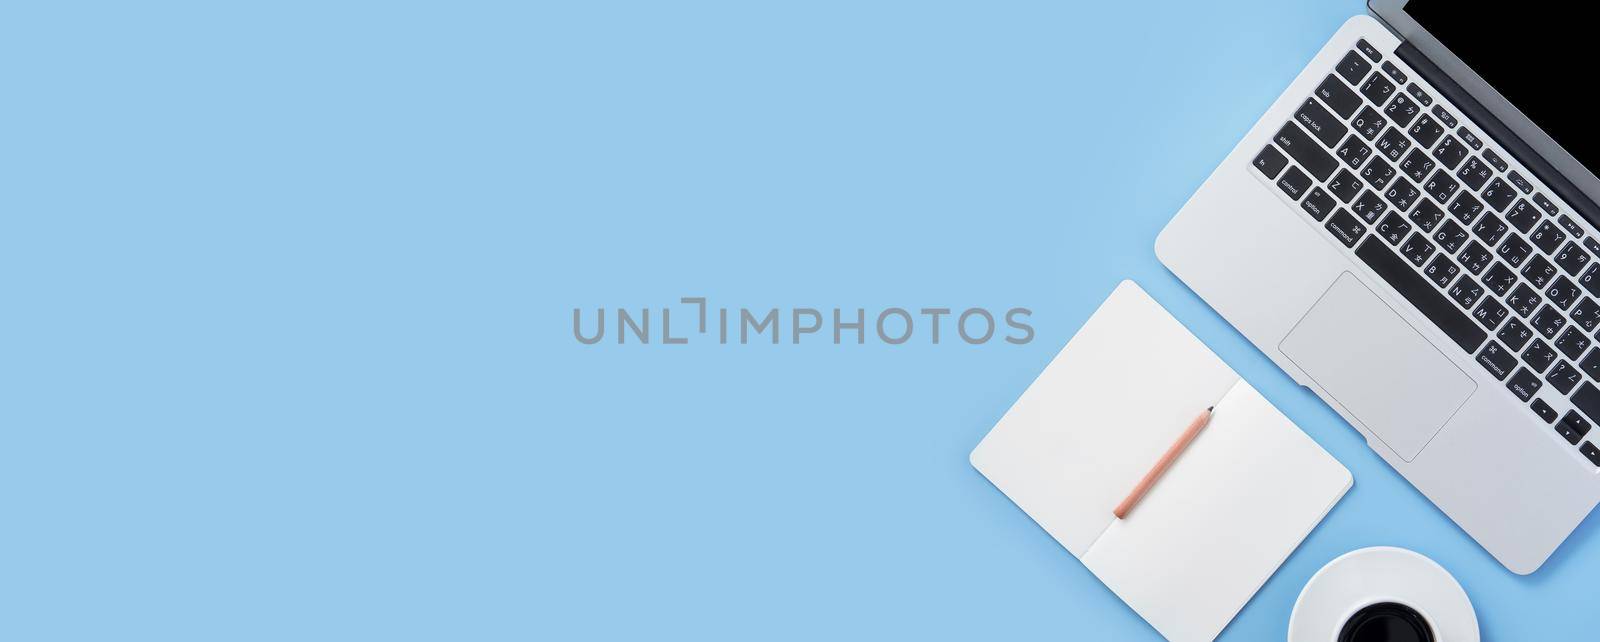 Girl write on open white book or accounting on a minimal clean light blue desk with laptop and accessories, copy space, flat lay, top view, mock up by ROMIXIMAGE